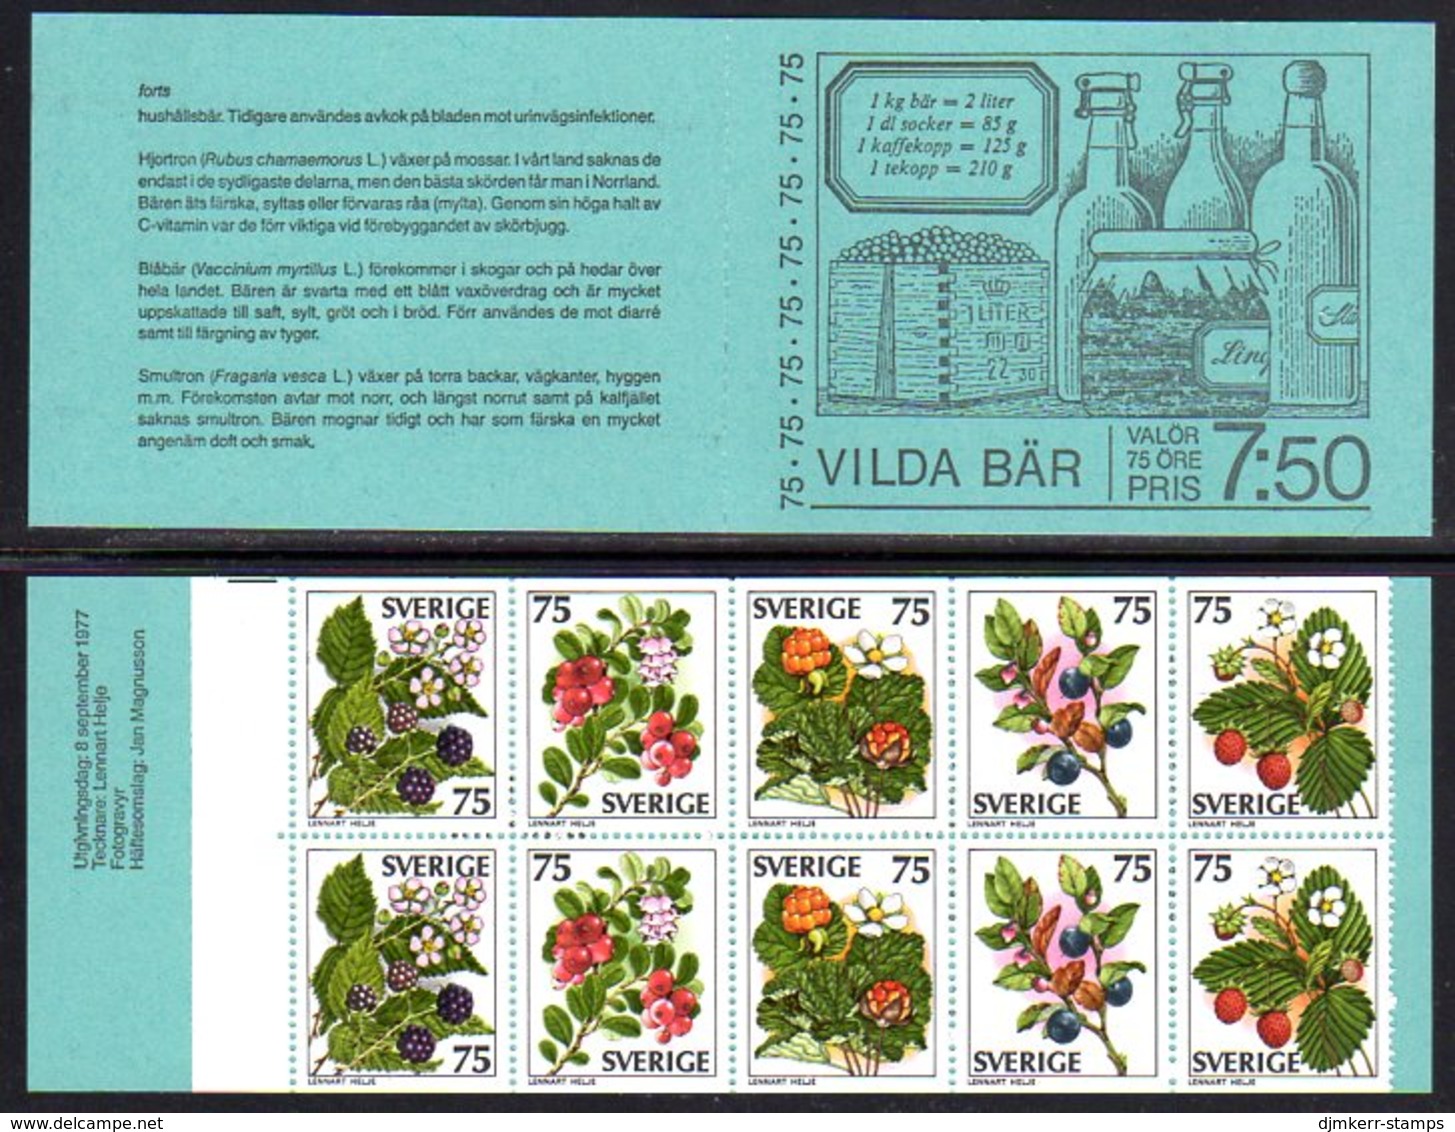 SWEDEN 1977 W[ld Berries Booklet MNH / **. Michel MH62 - 1951-80